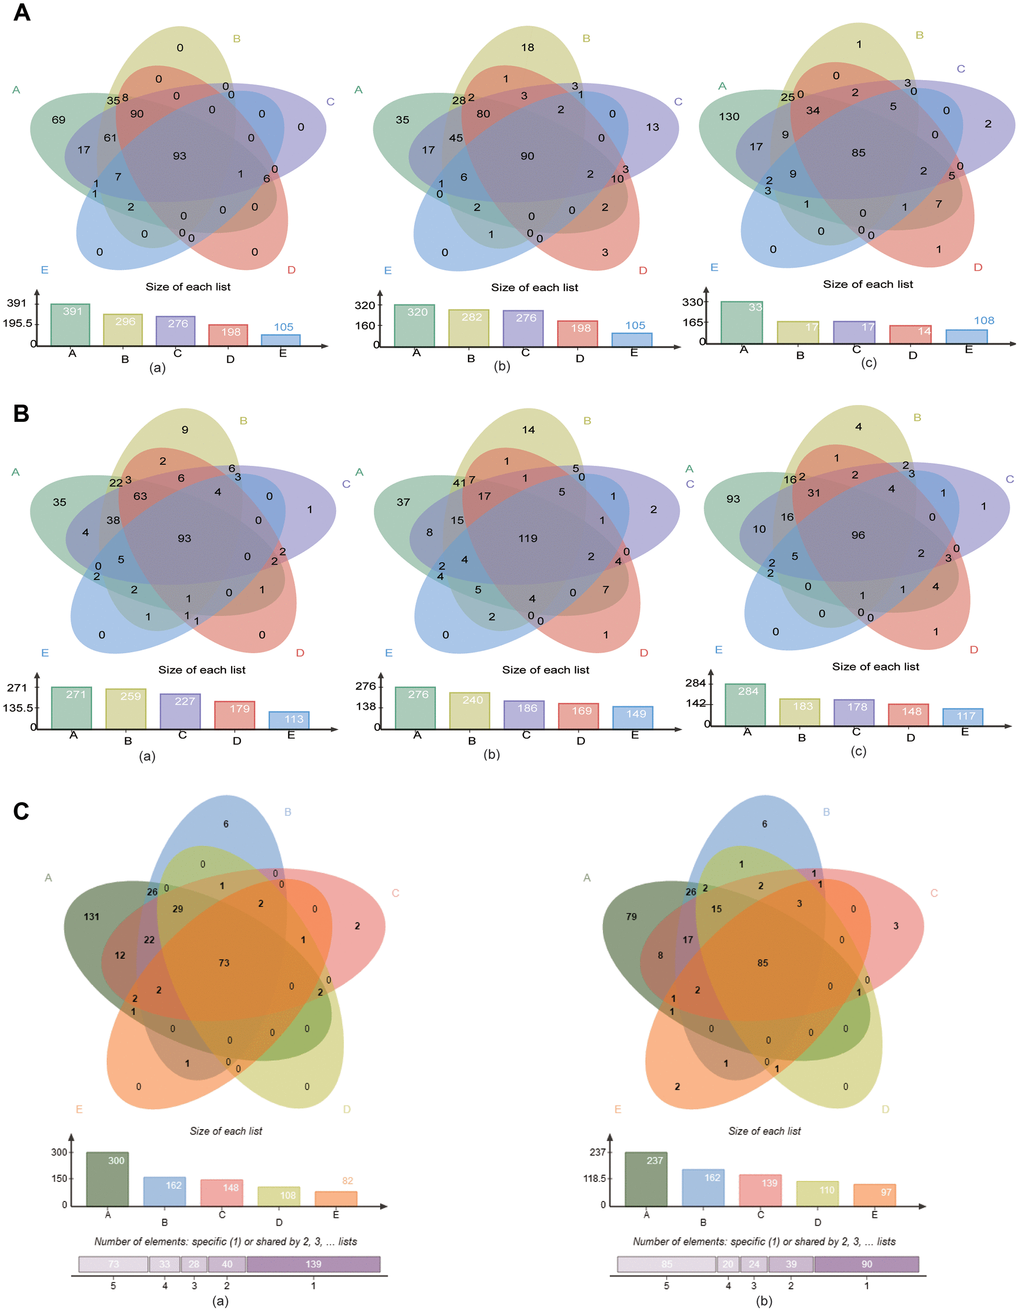 The “core microbiome” of the age groups in the three sites. (A) The “core microbiome” of various age groups at the genus level. (a) GCF; (b) SAL; (c) TB. (B) The “core microbiome” of various age groups at the species level. (a) GCF; (b) SAL; (c) TB. (C) The “core microbiome” of the three oral cavity sites with age at the genus level. (a), genus level; (b) species level.